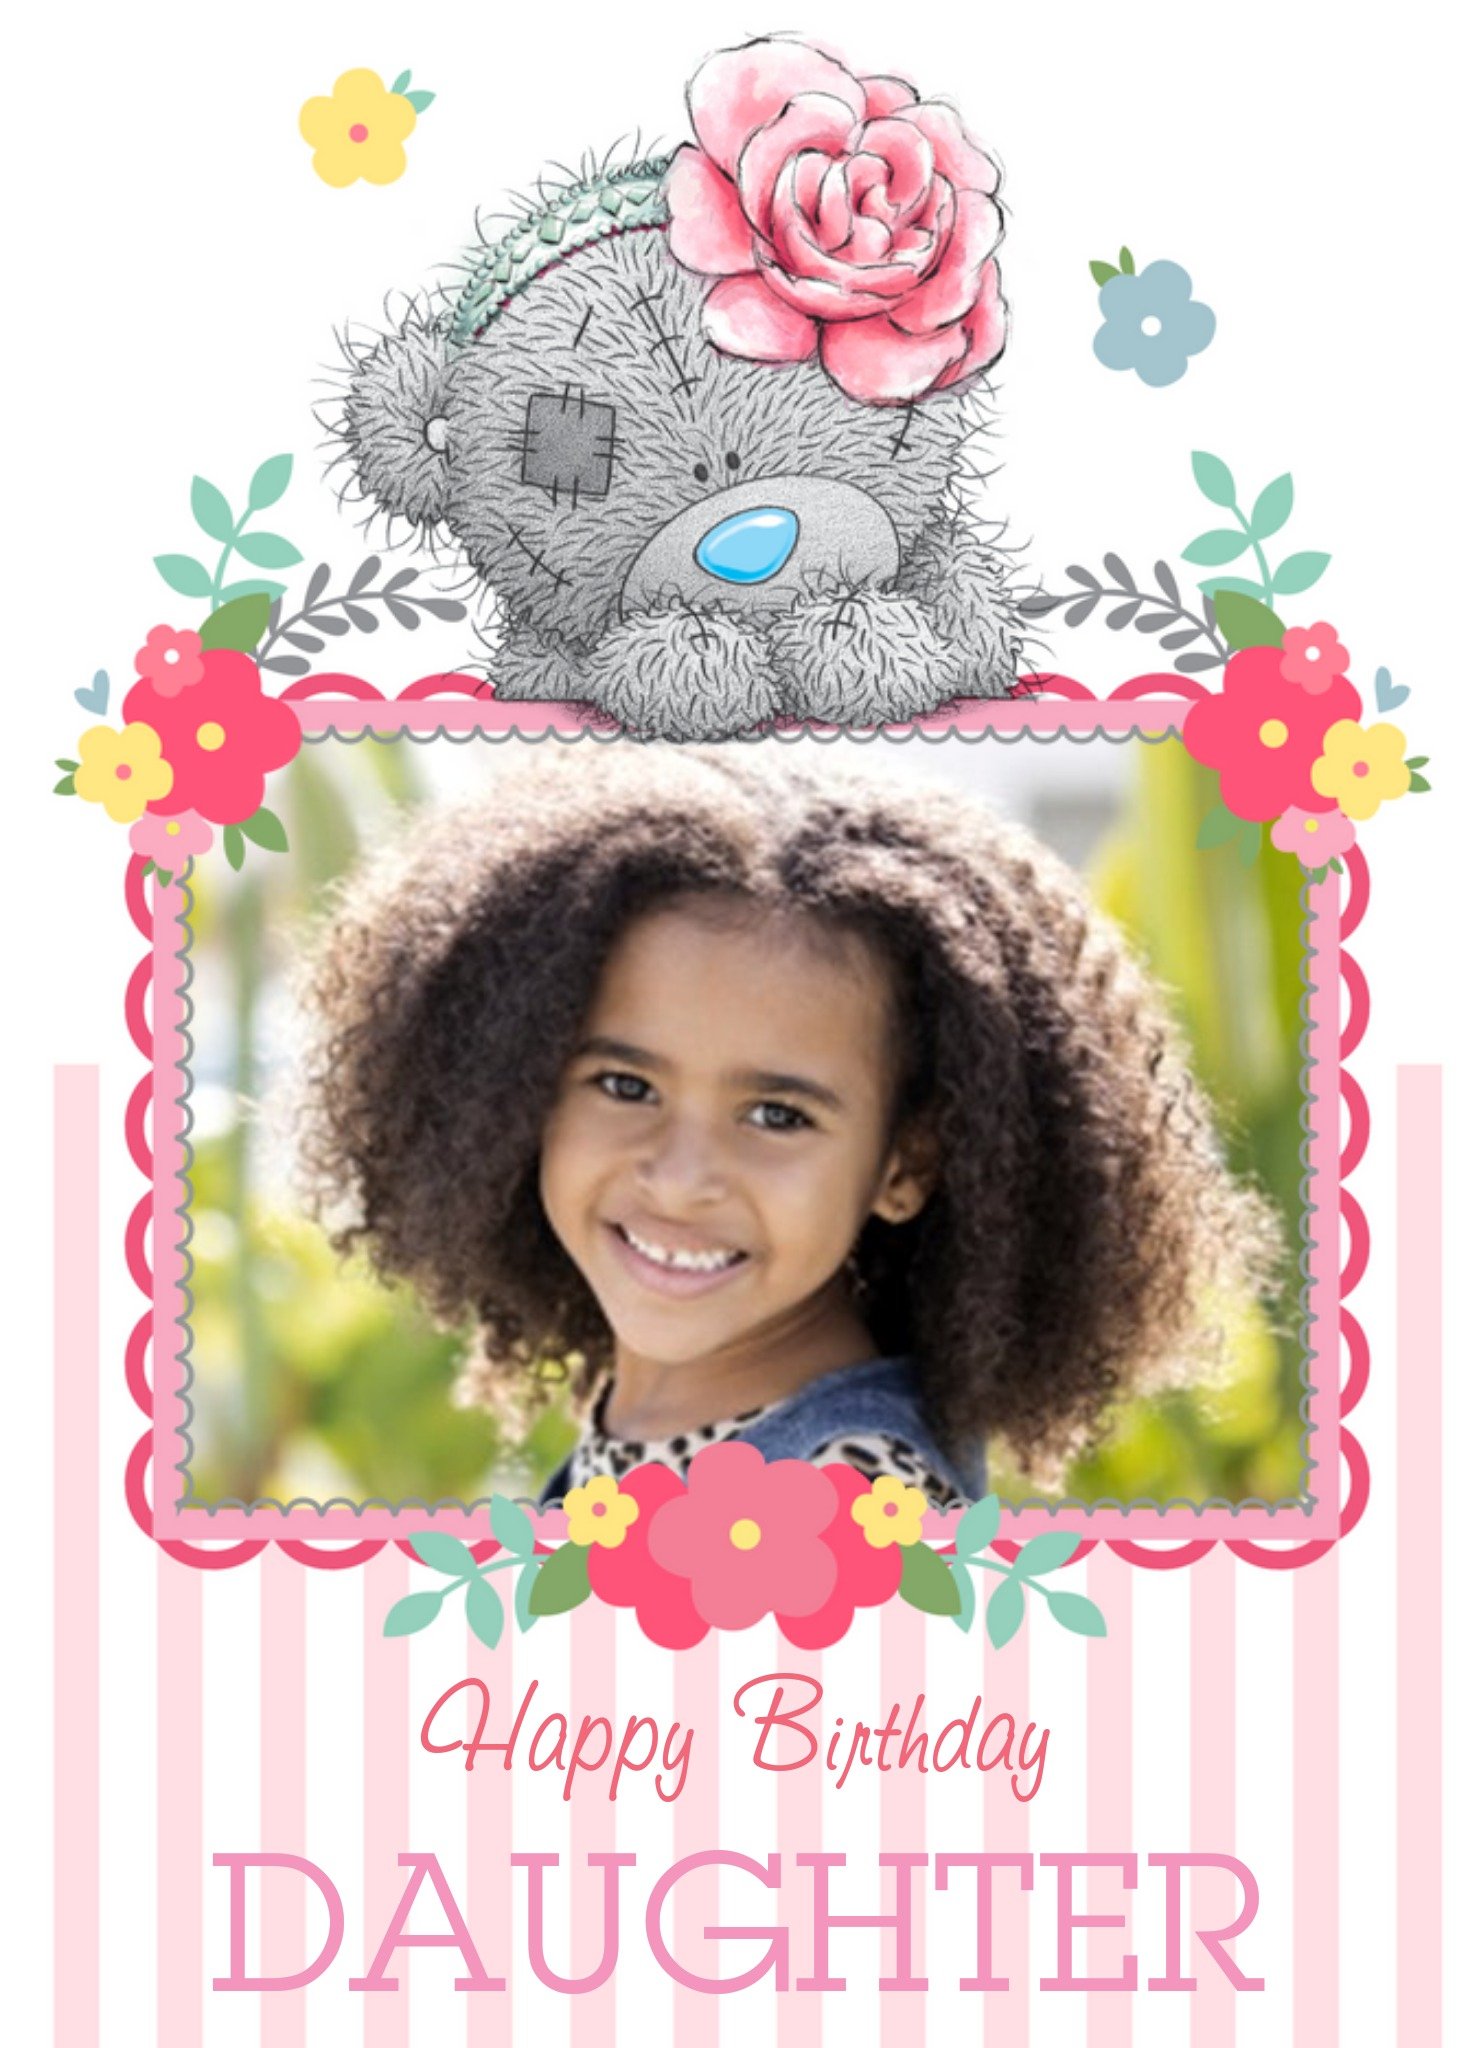 Me To You Tatty Teddy With Rose Headband Personalised Photo Upload Birthday Card For Daughter Ecard